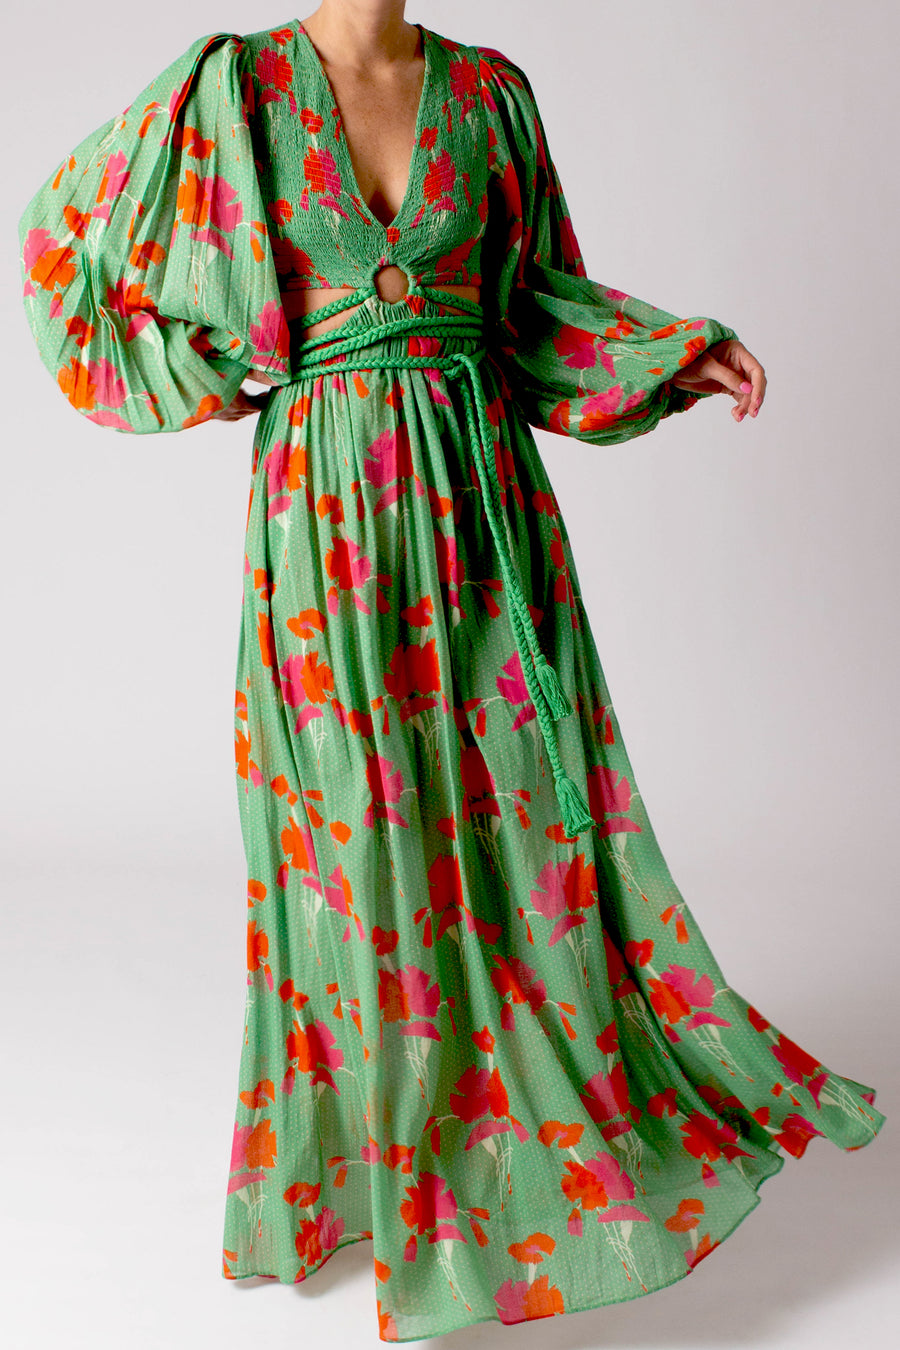 This is a photo of a woman wearing a long green dress with flowers on it.